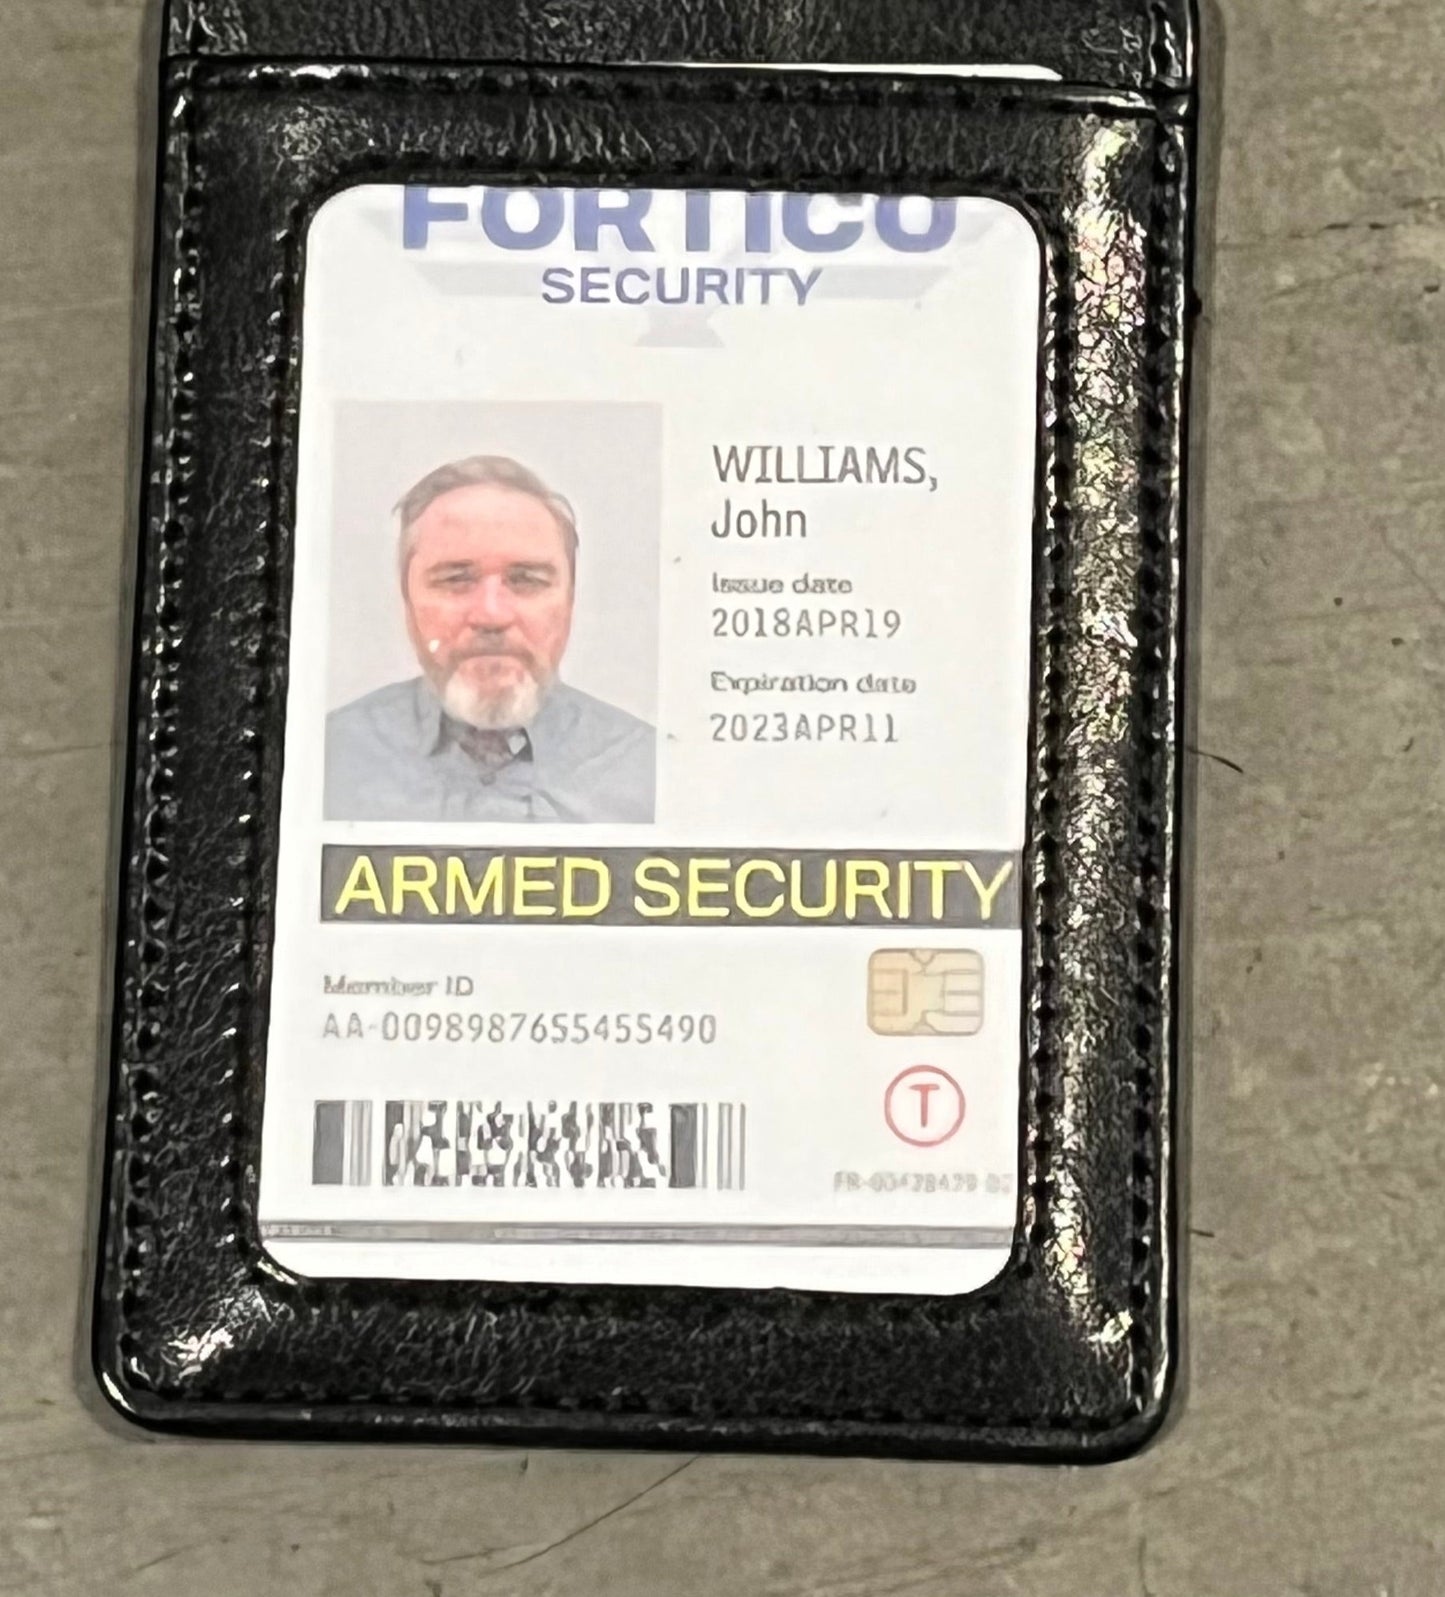 WRATH OF MAN: John's HERO FORTICO I.D. Tag and Security Badge